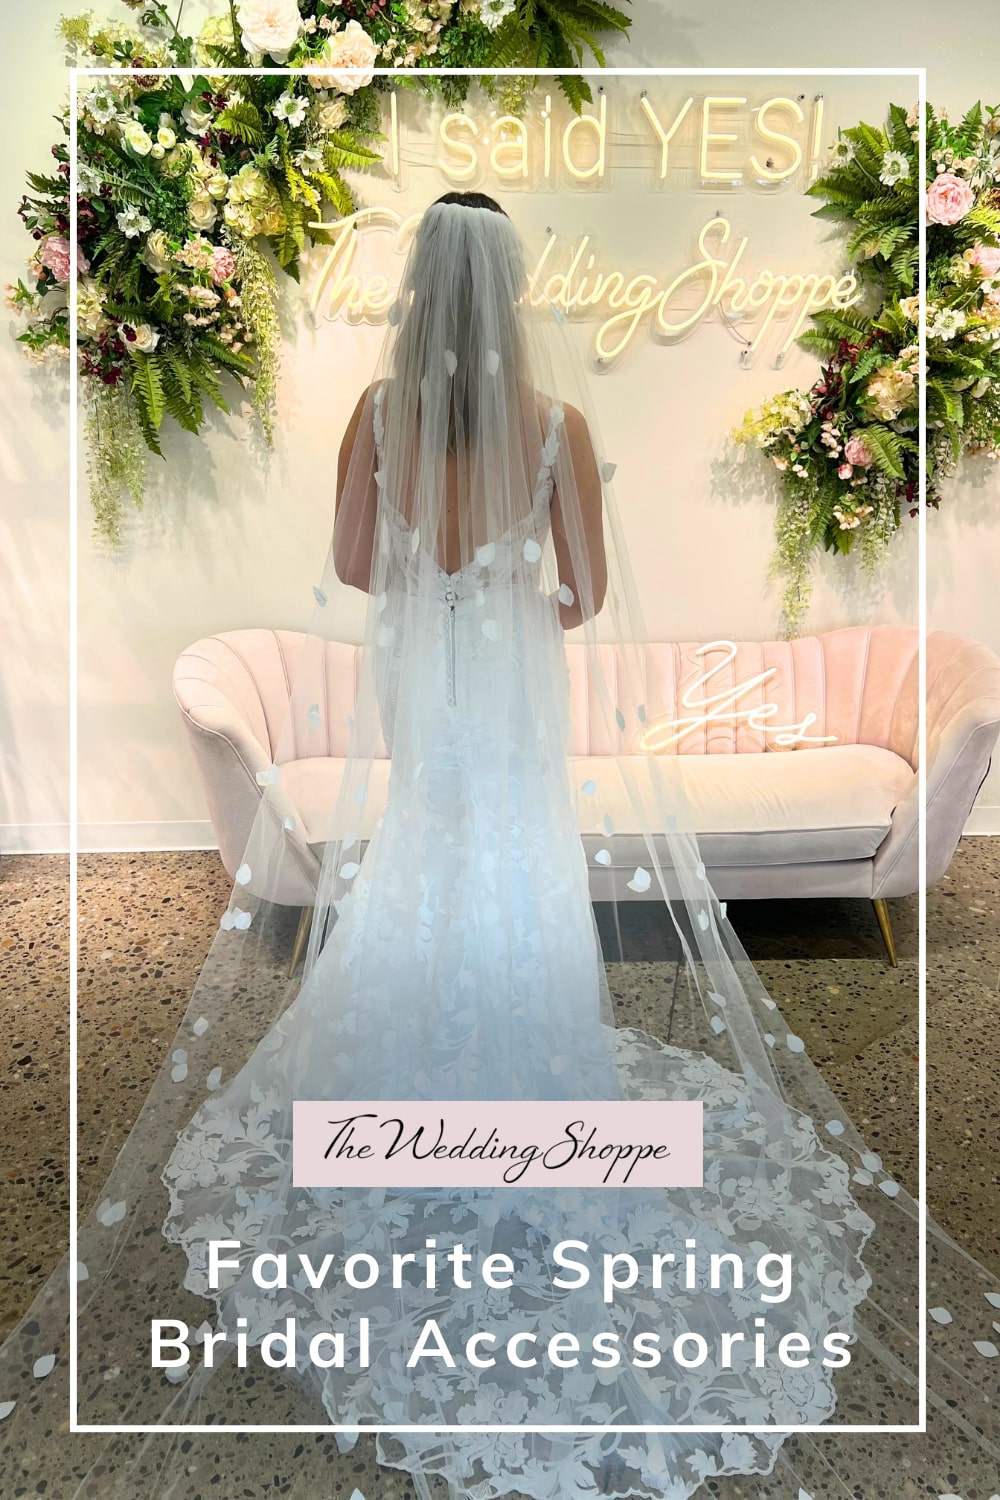 pinnable graphic for "Favorite Spring Bridal Accessories" from The Wedding Shoppe